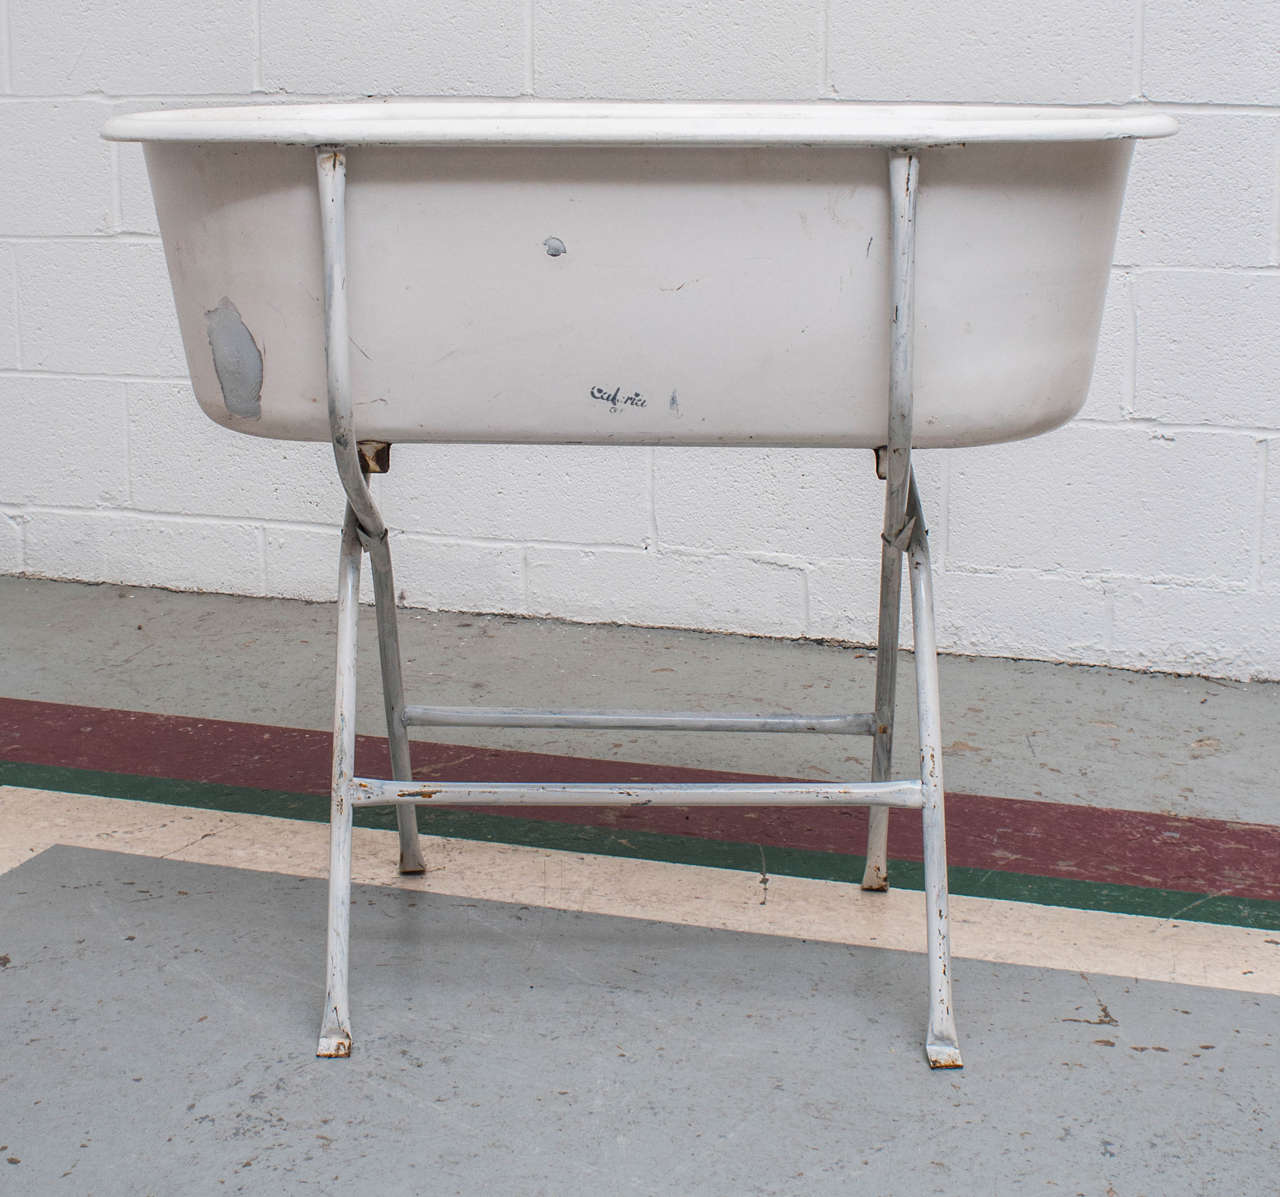 A vintage enamel baby bath on tubular stand. Great as a planter or as a wine and beer cooler at a summer party.